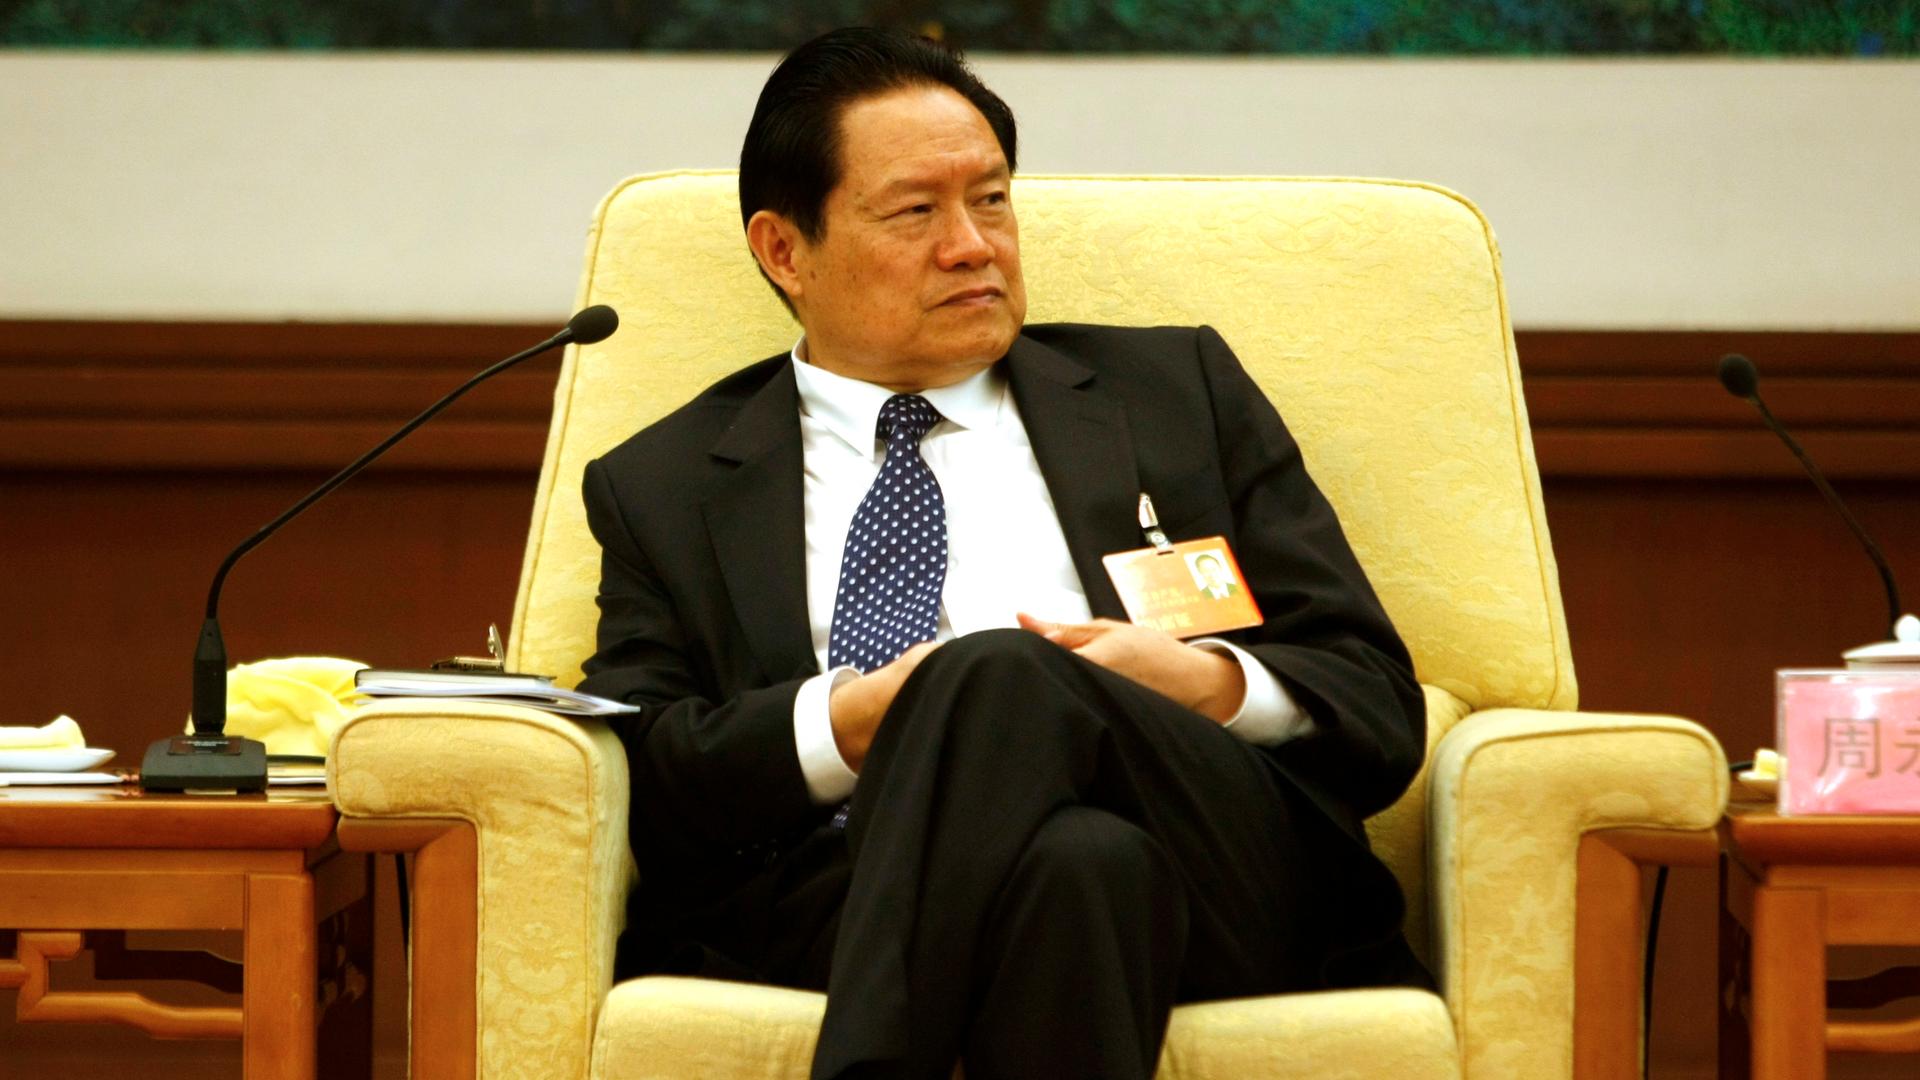 China's then Public Security Minister Zhou Yongkang attends the 17th National Congress of the Communist Party of China at the Great Hall of the People, in Beijing. (October 16, 2007 file photo)